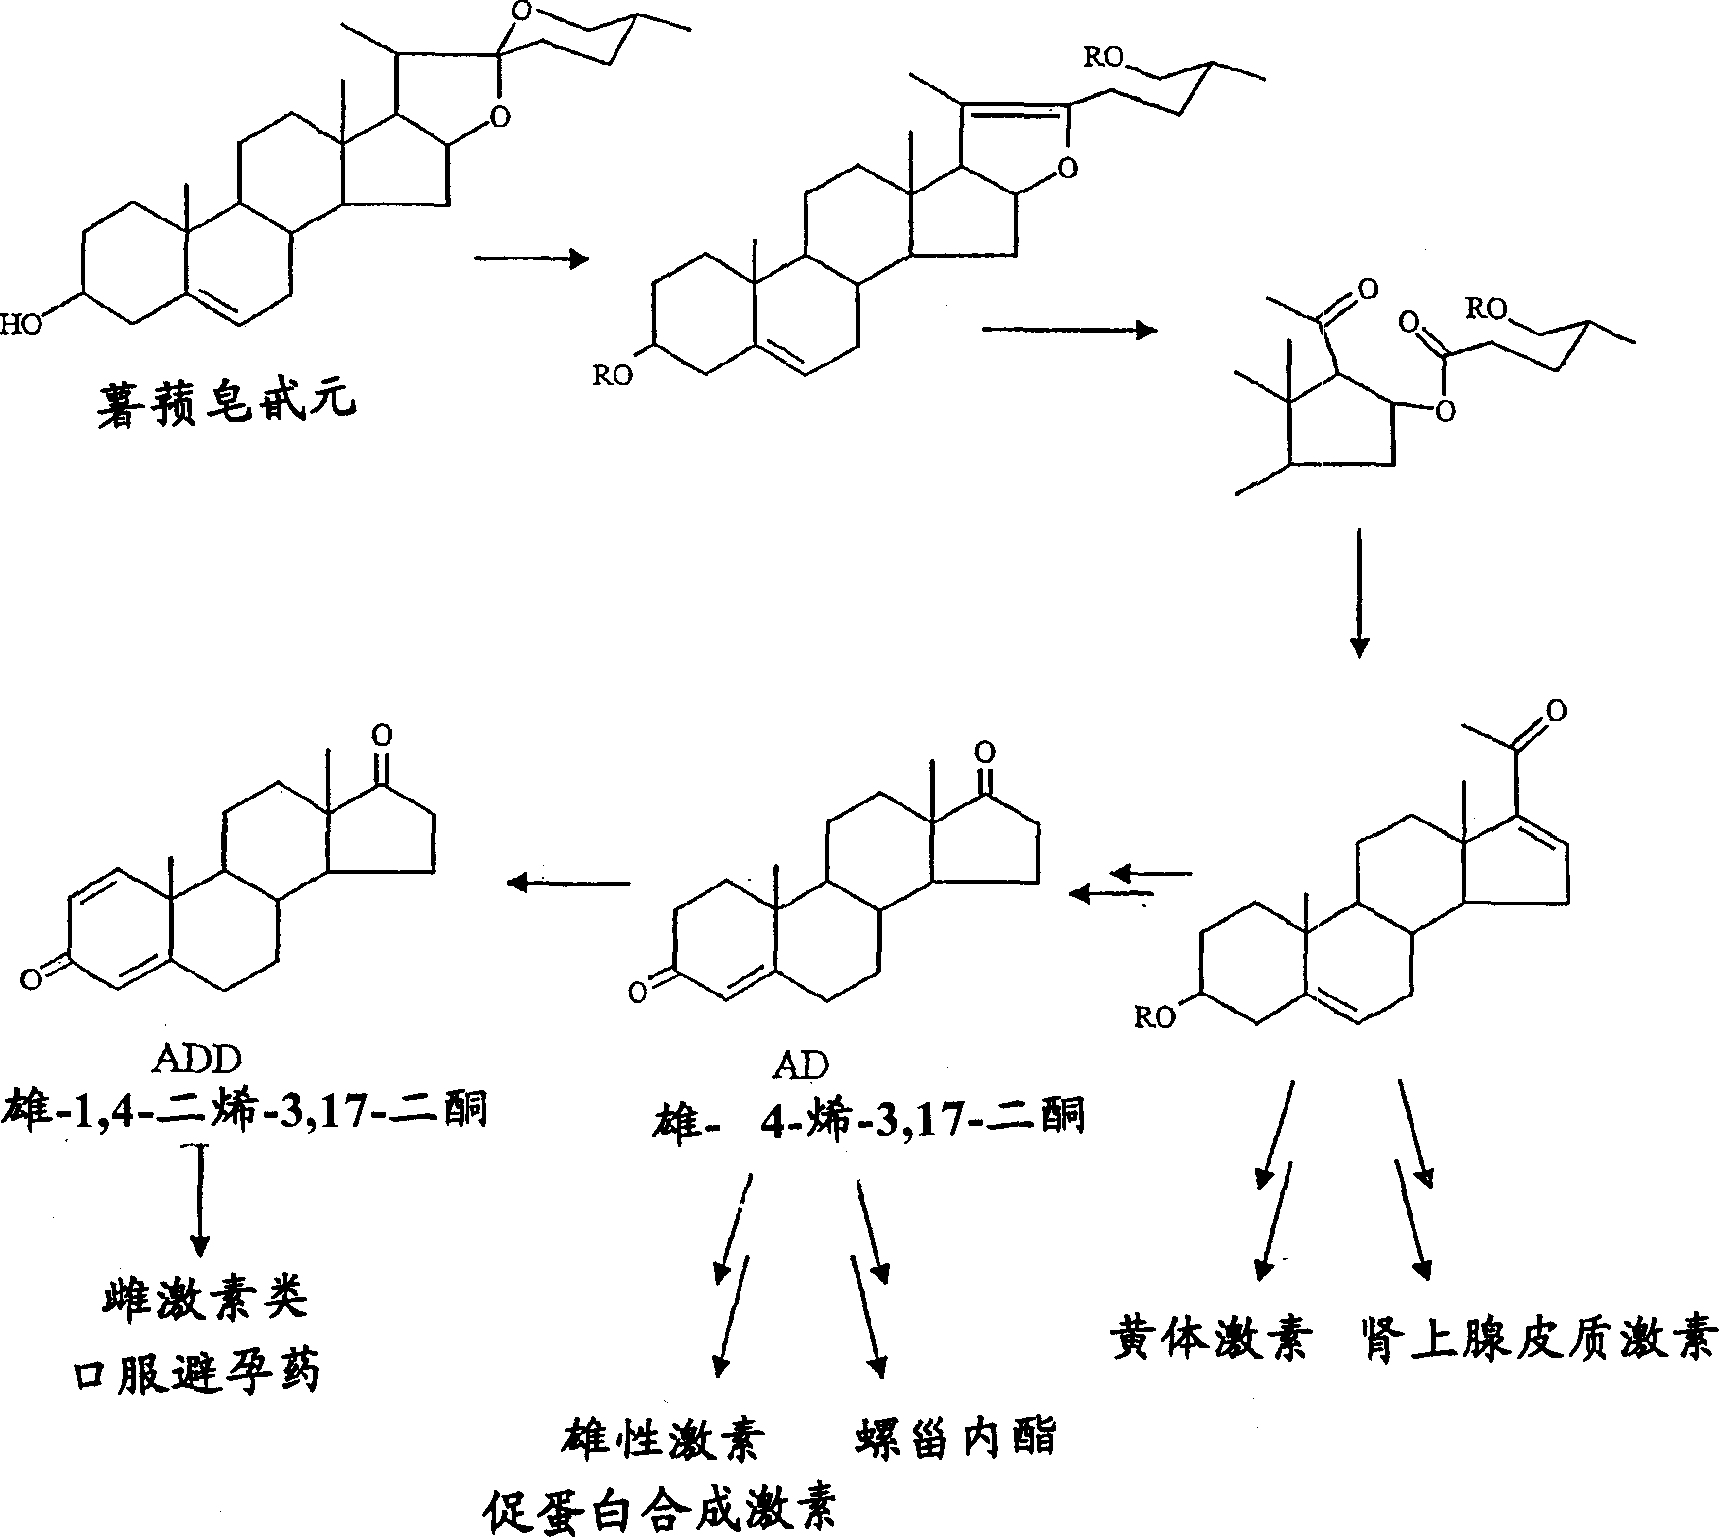 Process for fermentation of phytosterols to androstadienedione